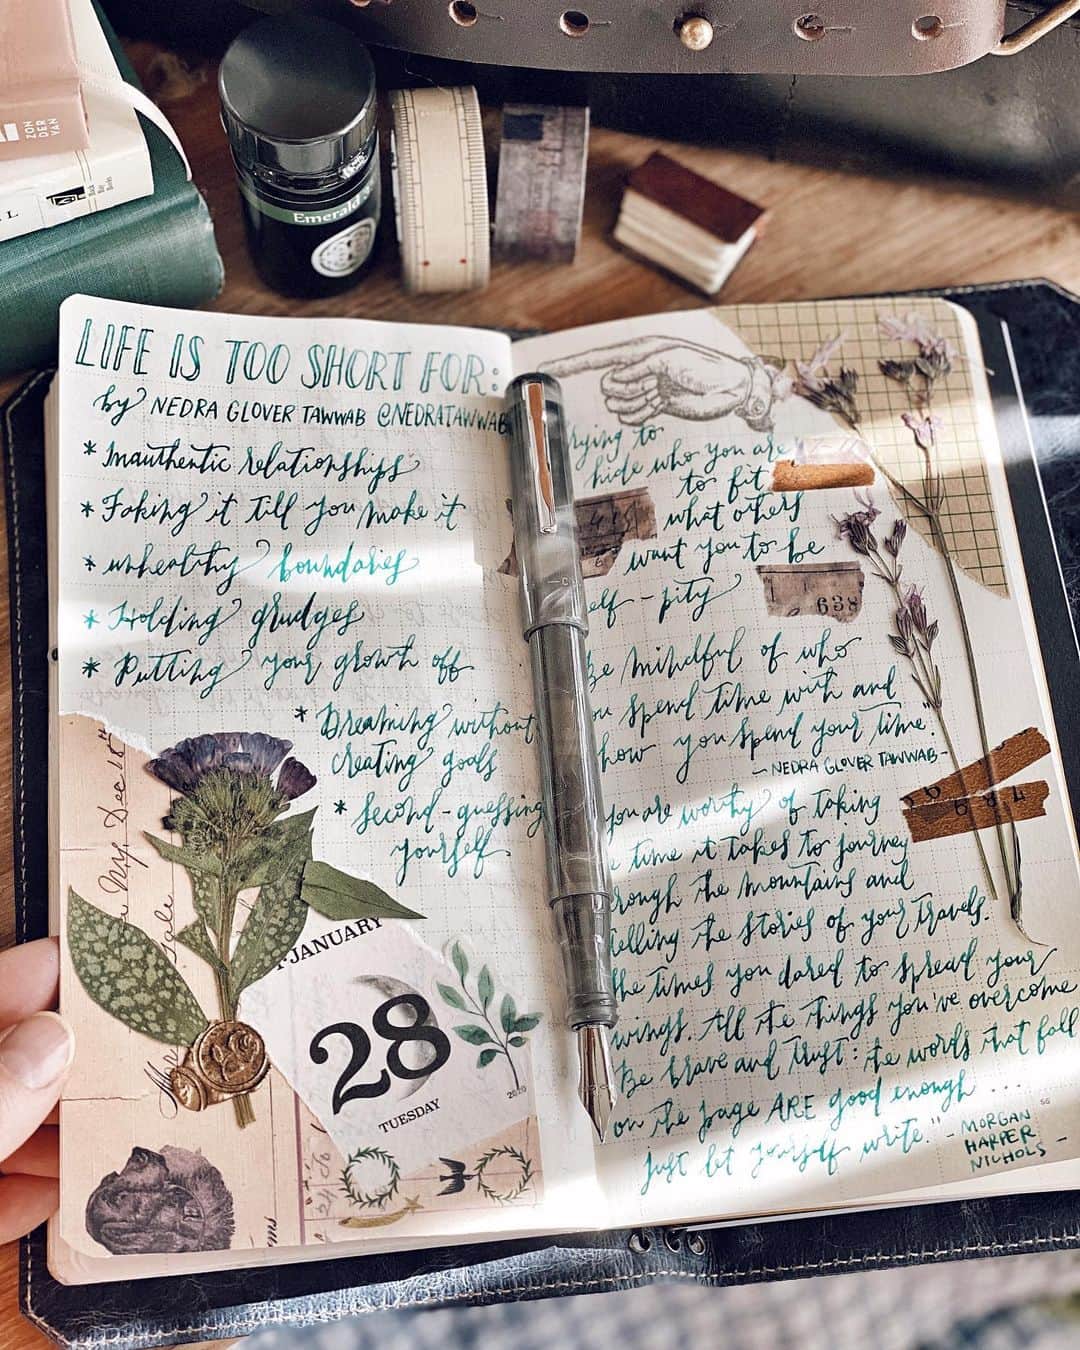 Catharine Mi-Sookさんのインスタグラム写真 - (Catharine Mi-SookInstagram)「Today’s self-care: a pause in the day for rooibos tea in my favorite mug, bullet-journaling a helpful list by @nedratawwab, making my creative nook beautiful for no other reason than it bringing me joy, affirming myself out loud with truth, and unpacking a fear and choosing to honor what is healthy for me instead of yielding to that fear. Step by step, step by step. . . Here is the list by @nedratawwab from her post earlier today that I penned in my weekly bullet journal — . . Life Is Too Short For: . * Inauthentic relationships * Faking it till you make it * Unhealthy boundaries * Holding grudges * Putting your growth off * Dreaming without creating goals * Second-guessing yourself * Trying to hide who you are to fit what others want you to be * Self-pity . “Be mindful of who you spend time with and how you spend your time.” -Nedra Glover Tawwab . . Do any of these resonate with you? Would you add anything to this list? This is my journal prompt for later — which of these are prominent in my life right now and what I might add to this list as well. What is something you can do today to take care of yourself? . . Joyful nook: Model 03 fountain pen with the steel extra-fine flex nib inked with Emerald 357, all by @franklinchristoph. Vagabond Notebook & Fortis Slingbag co-designed between @franklinchristoph and myself - link in bio. Universal Planner TN Insert @soumkine. Drafter Antique Textiles Pouch @pegandawl. Stickers & LCN brass pin @kiroku.de. Winter 2020 issue of @genic_mag (I have a feature in it). . . #selfcareroutine #bulletjournallove #journaling #franklinchristoph #fountainpens #fountainpenink #vagabondnotebook #fortisslingbag #whatsinmybag #travelersnotebook #soumkine #bulletjournalinspiration #bujoinspiration #bujoideas #bujospread #bulletjournalideas #stationerylover #pegandawl #thedailywriting #petalsandprops #loveforanalogue #genic_mag #ofquietmoments #hyggelife #bookaesthetic #teaandseasons #plannercommunity #journallove」1月29日 2時17分 - catharinemisook